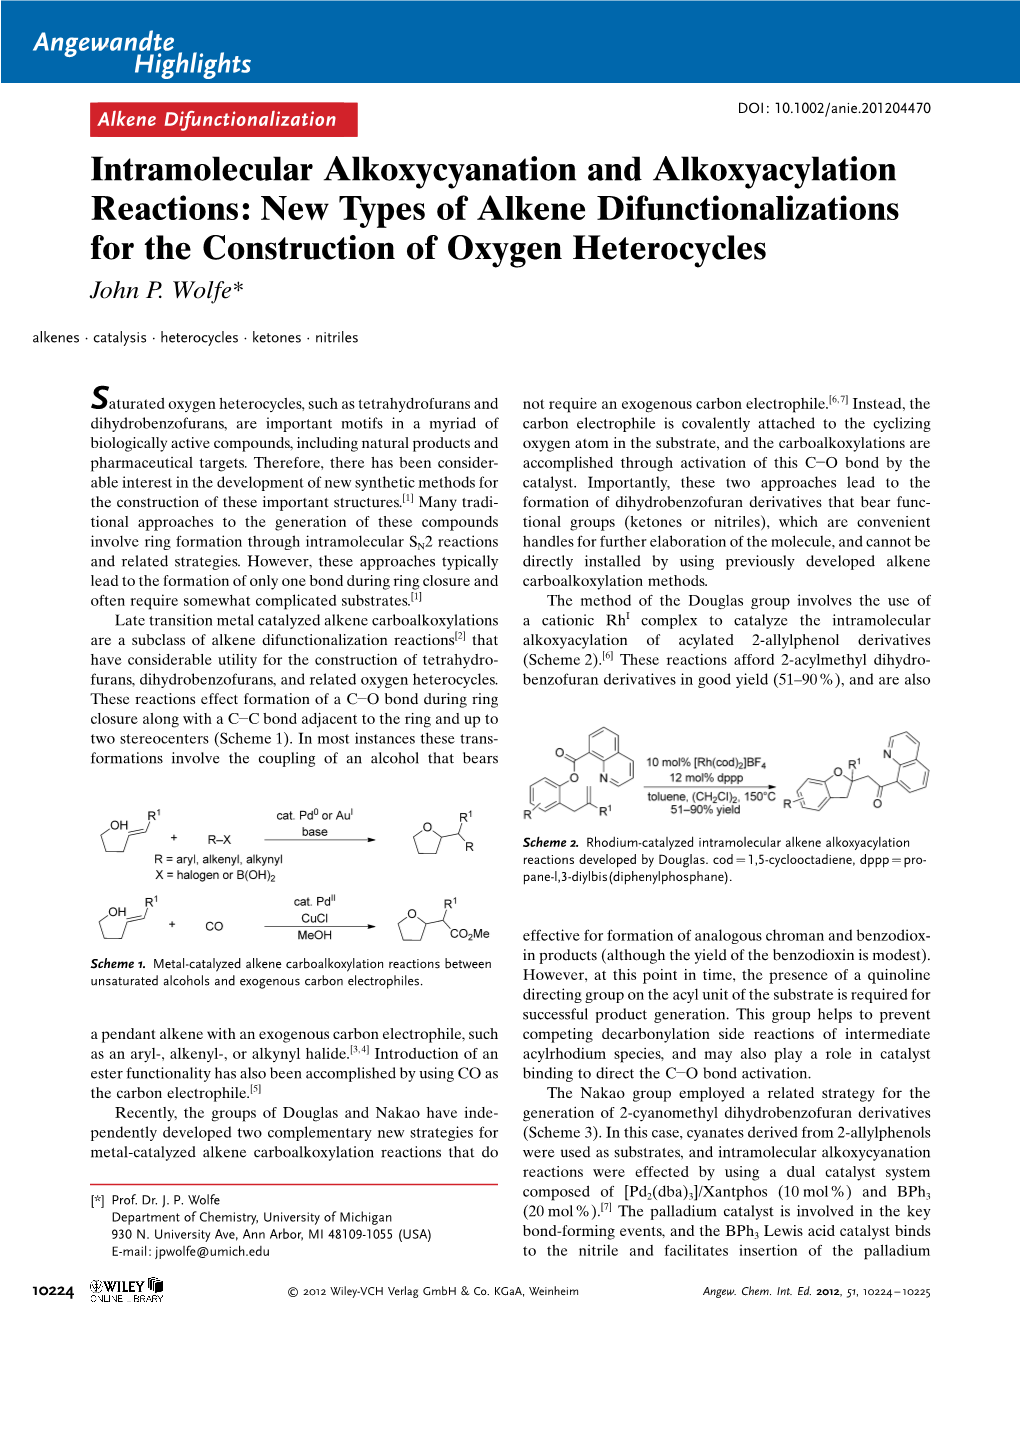 Intramolecular Alkoxycyanation and Alkoxyacylation Reactions: New Types of Alkene Difunctionalizations for the Construction of Oxygen Heterocycles John P